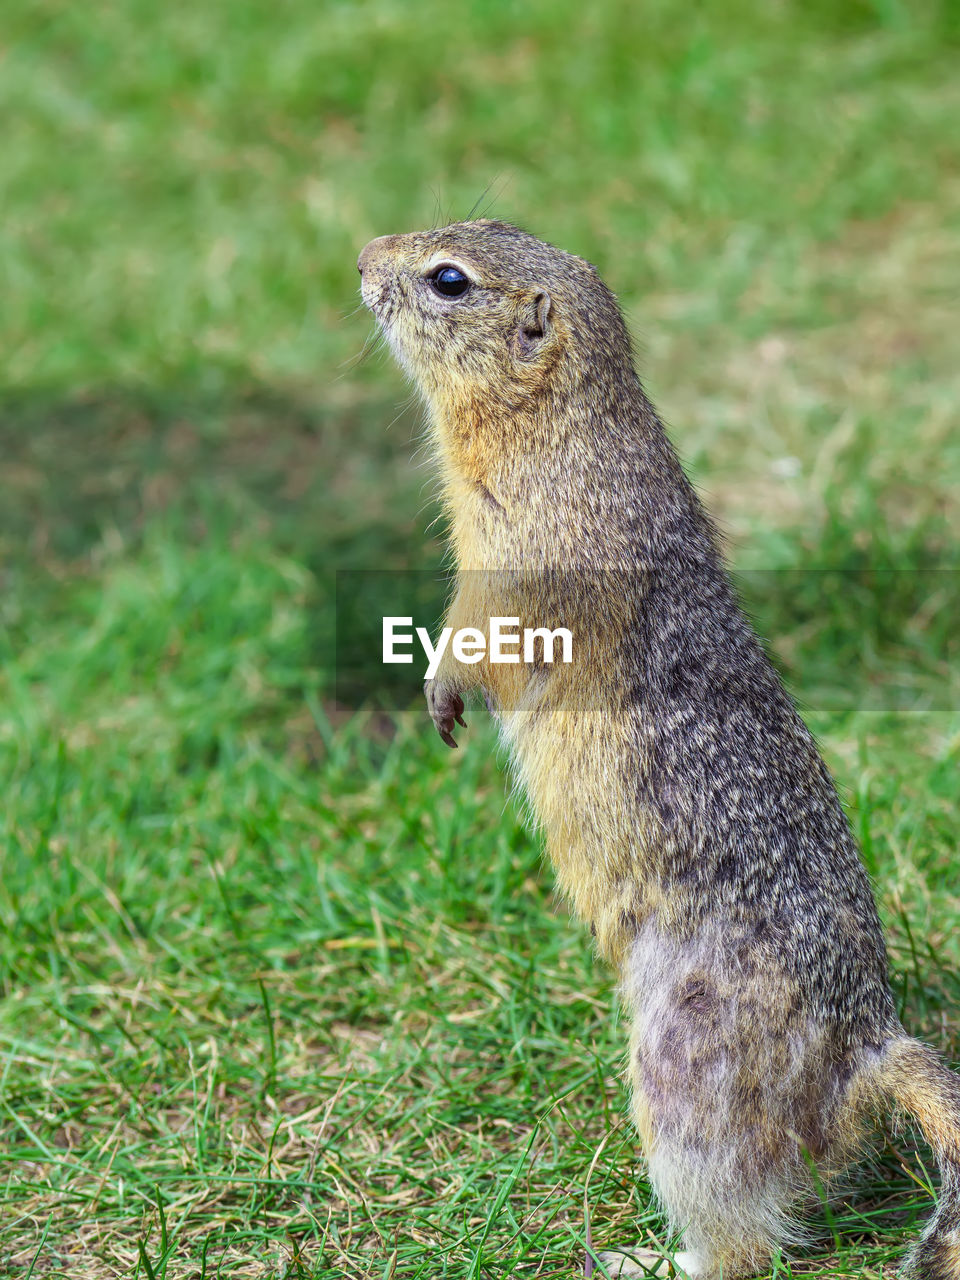 animal, animal themes, animal wildlife, one animal, wildlife, squirrel, mammal, grass, no people, rodent, nature, prairie dog, plant, whiskers, outdoors, full length, side view, day, focus on foreground, land, standing